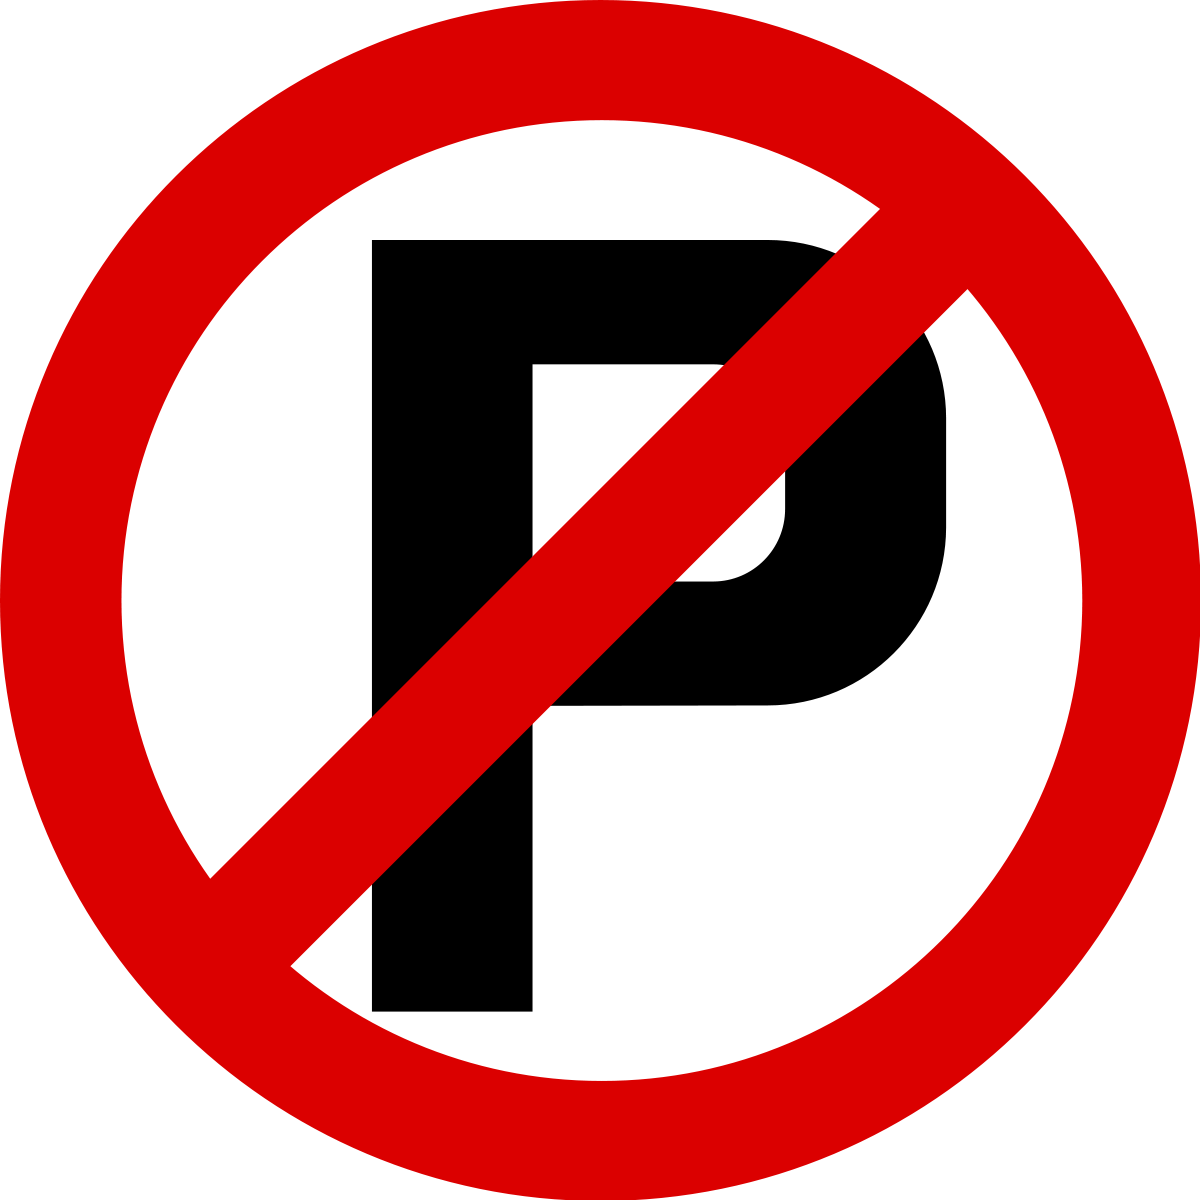 A No Parking Sign With A Red Circle